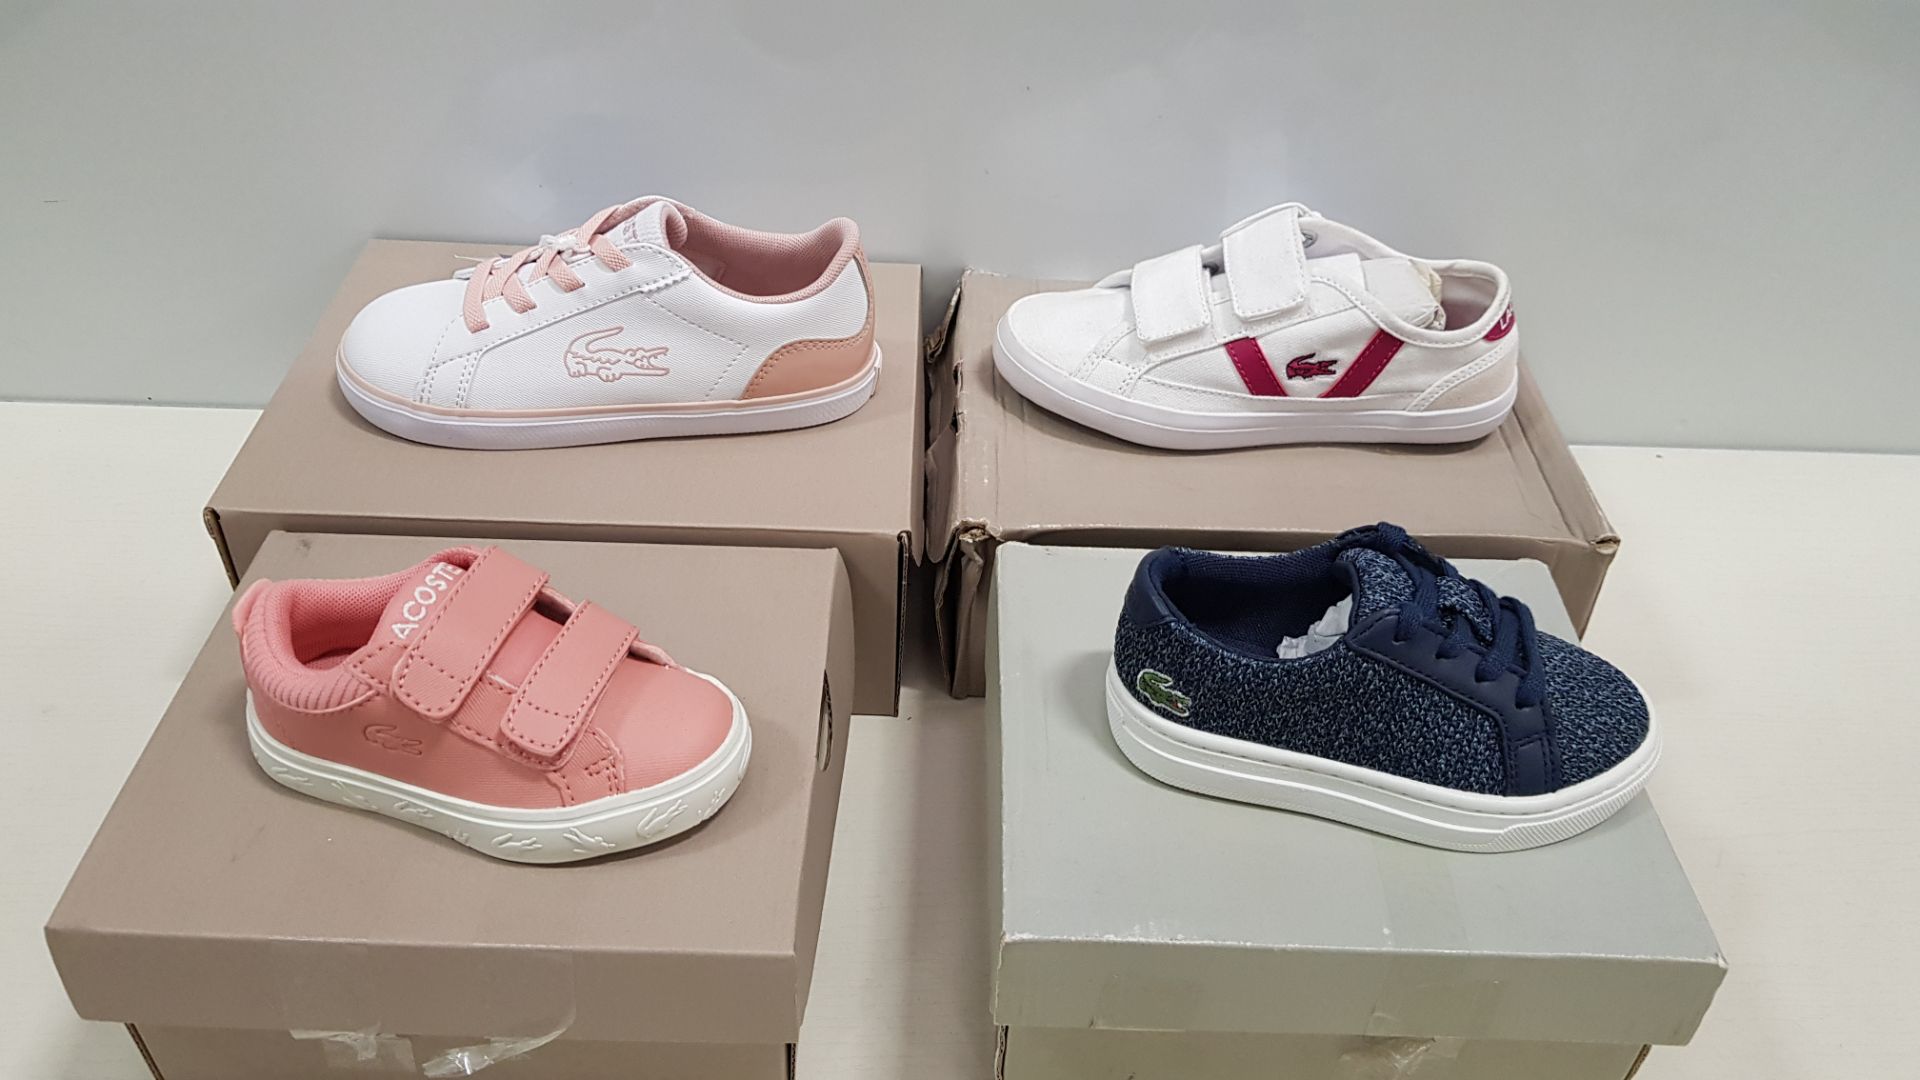 19 X BRAND NEW MIXED SPORTS FOOTWEAR LOT CONTAINING LACOSTE WHITE TRAINERS, LACOSTE WHITE PUMPS,